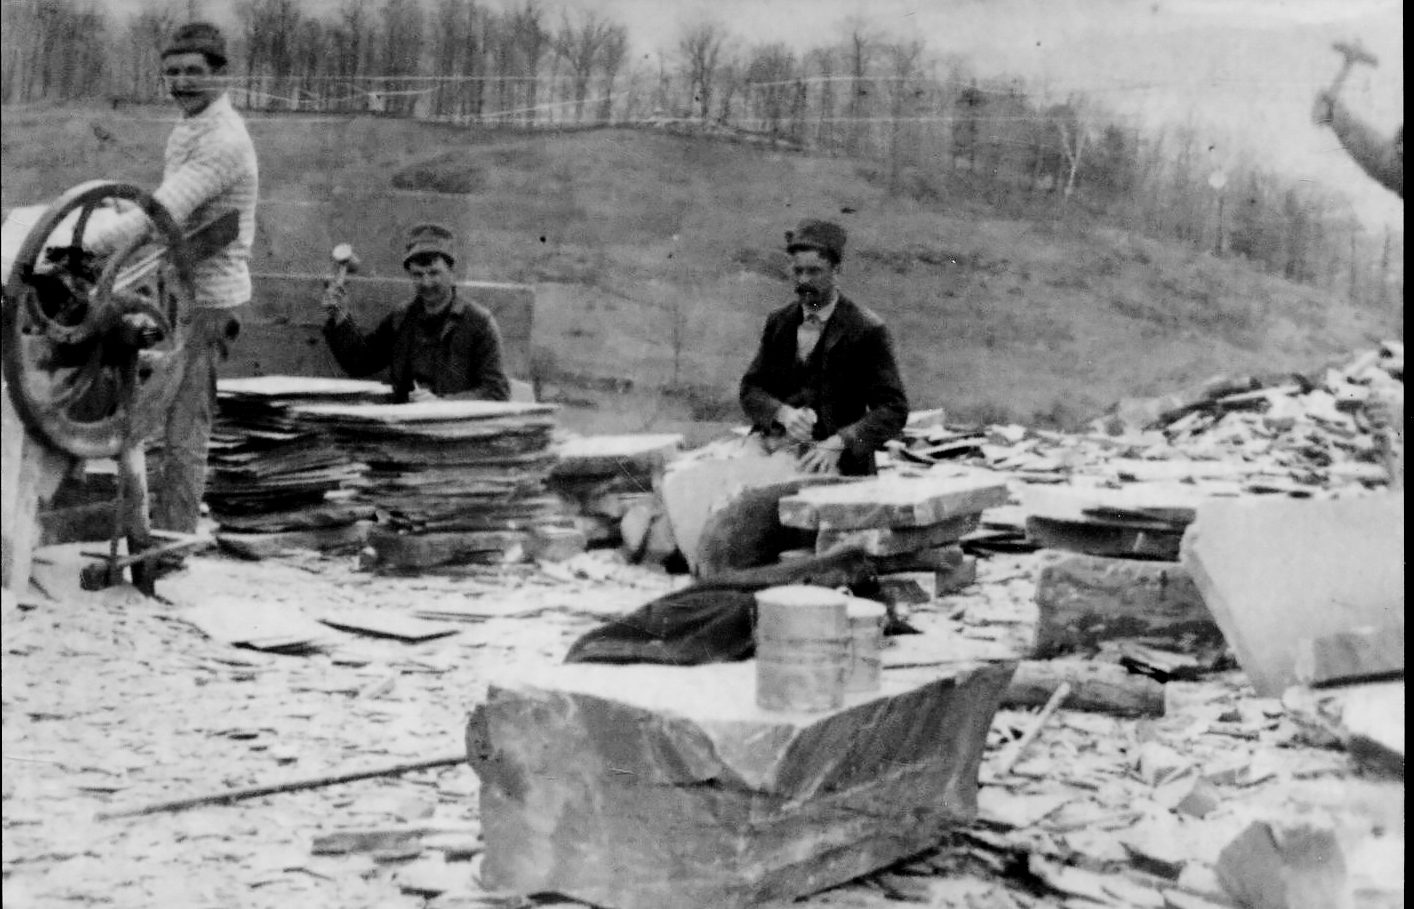 Stone Cutters In Greenvile NY, Greene County